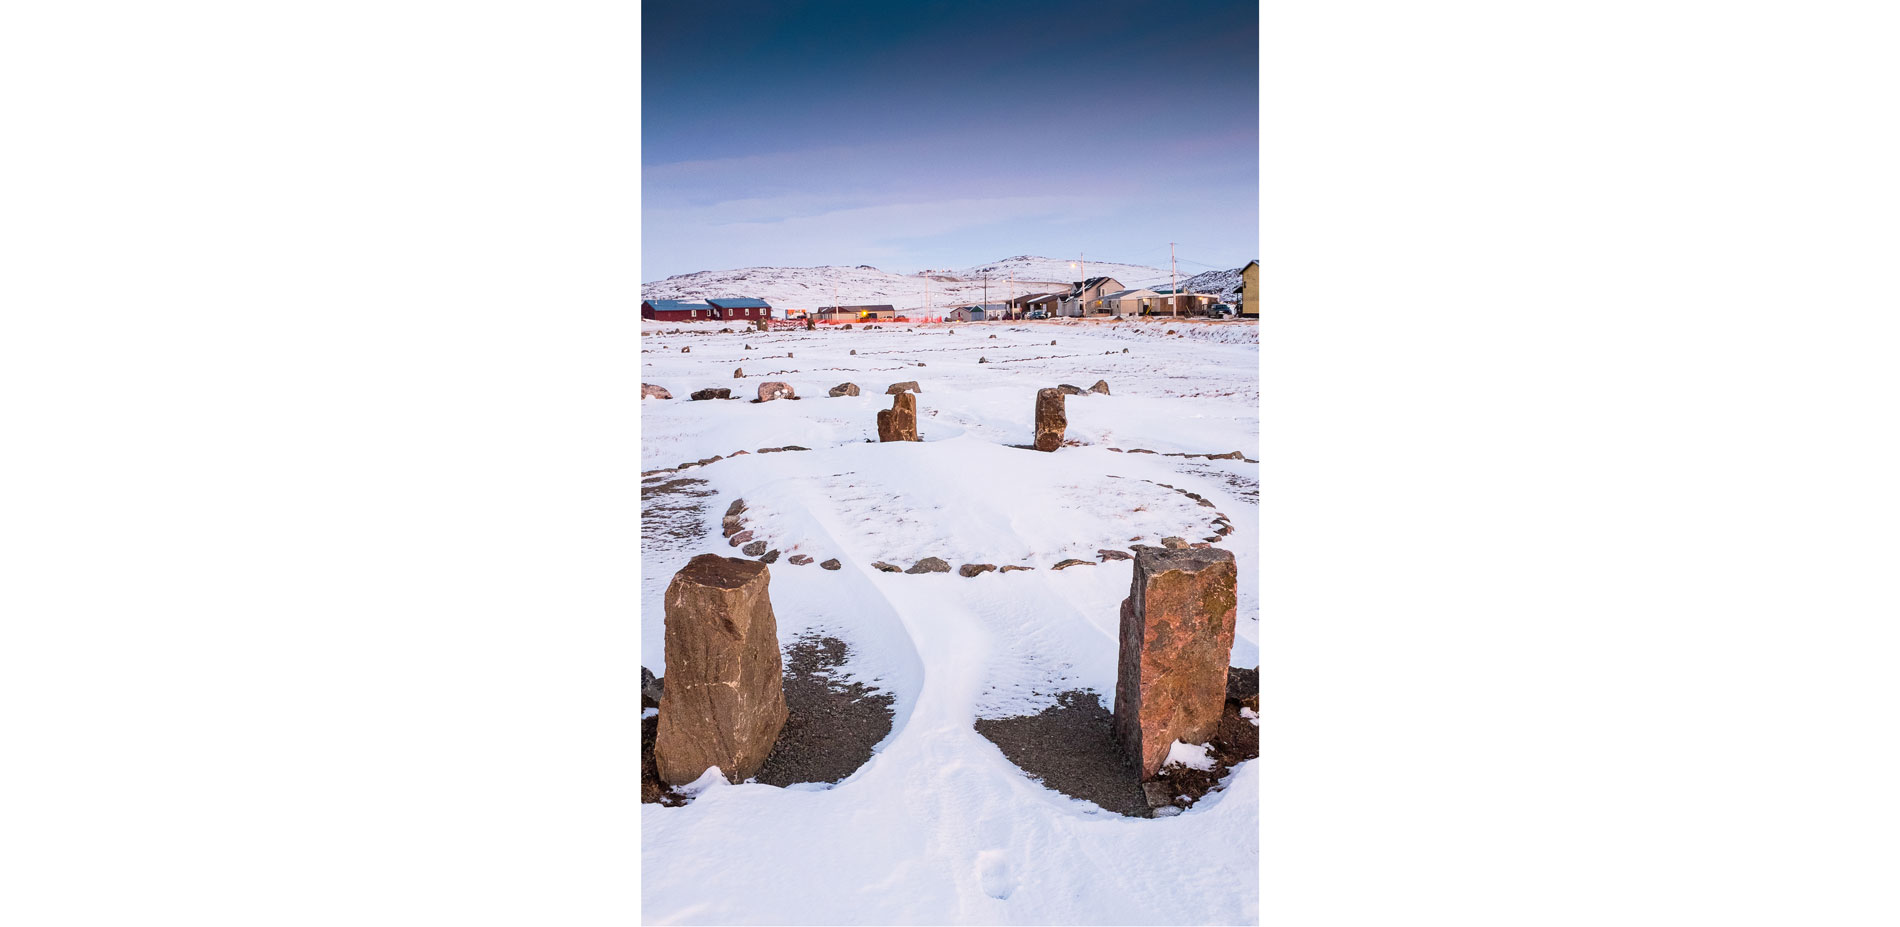 A hierarchy of boulders creates a strong geometry under snow, defining pathways and burial sites …